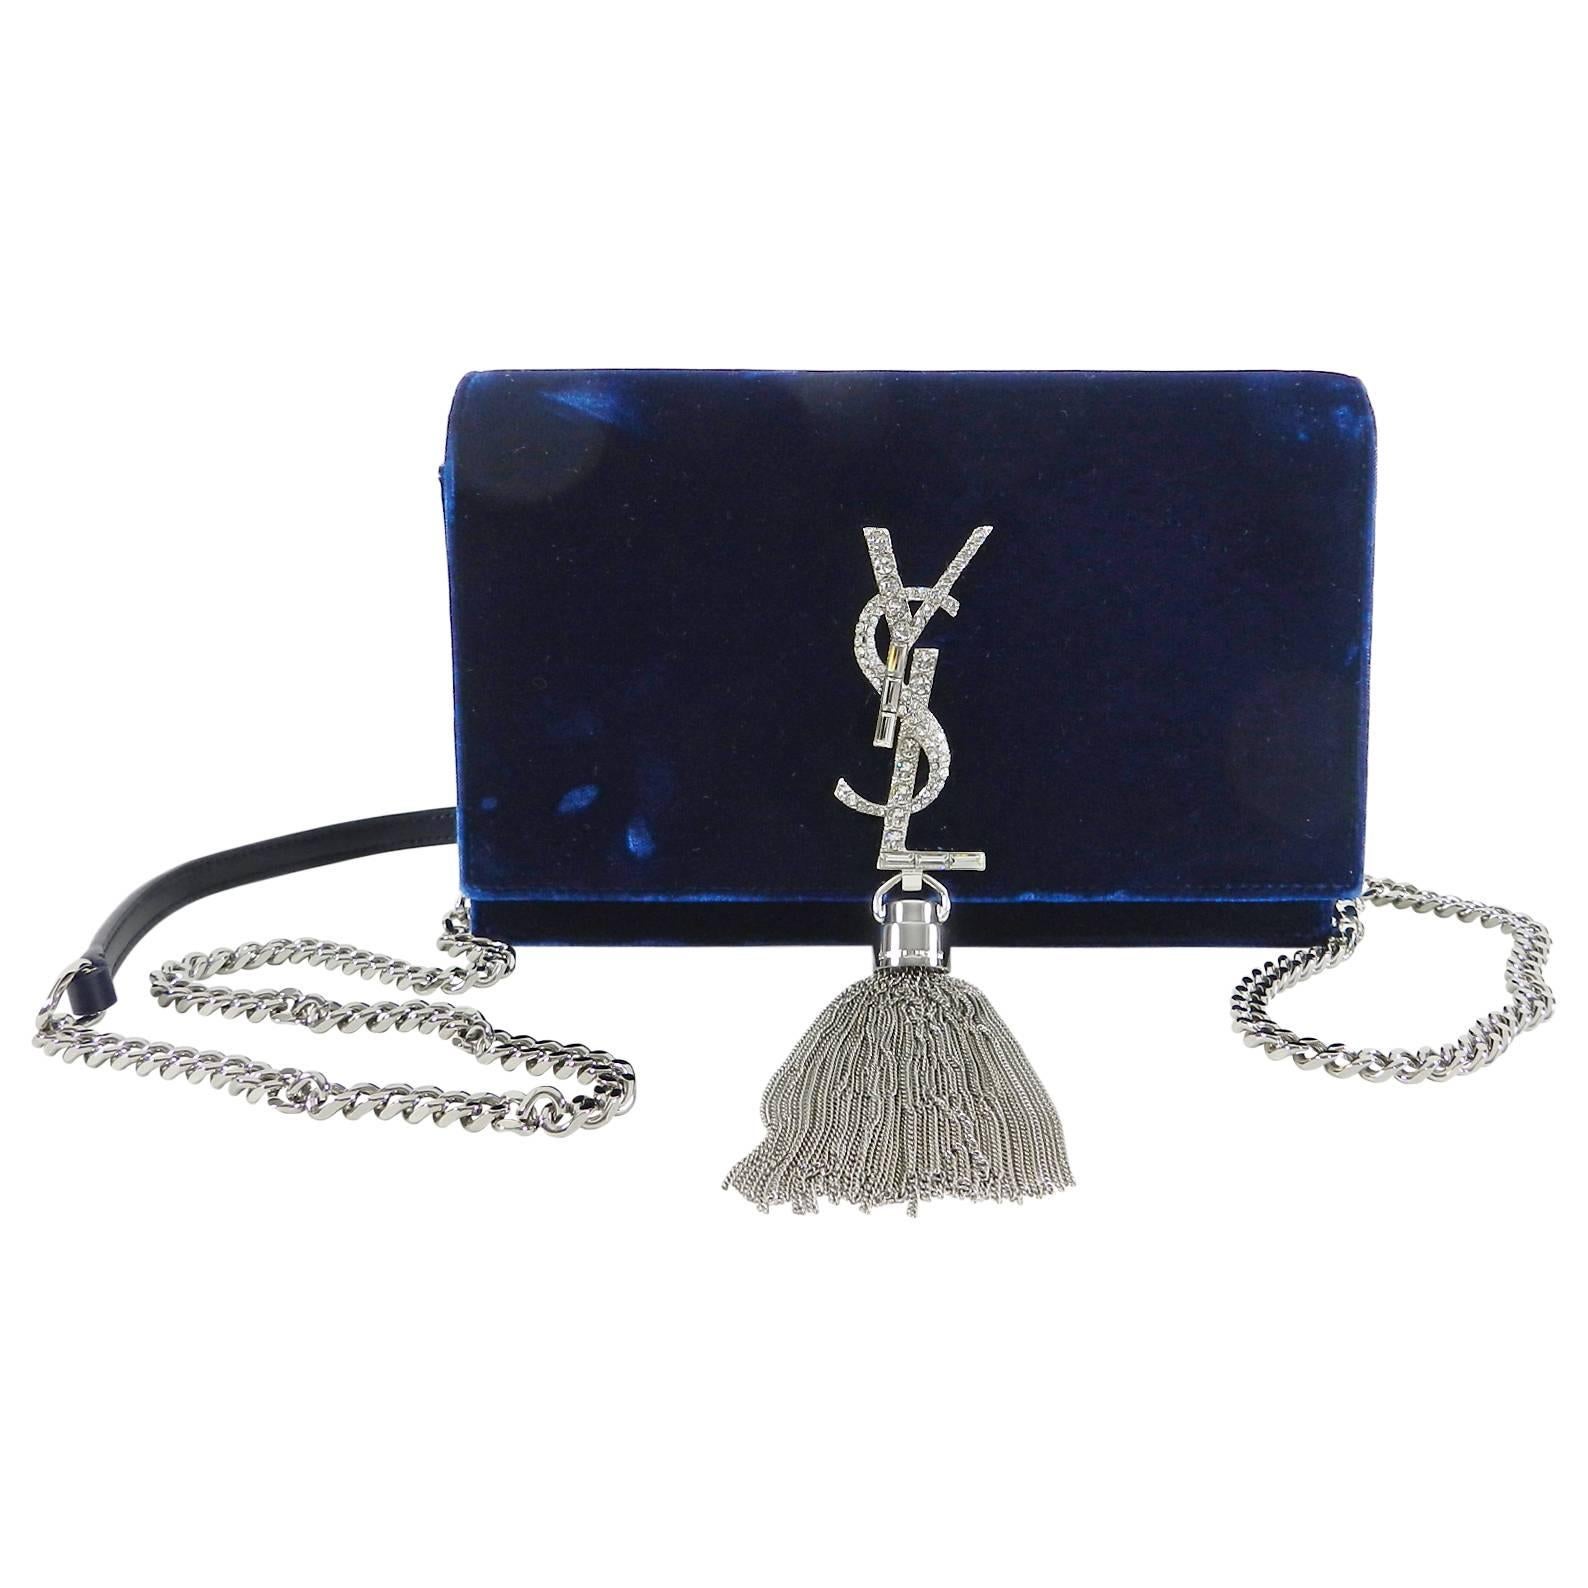 Saint Laurent Kate Tassel Blue Velvet and Rhinestone Crossbody Bag.  100% viscose velvet with silver-toned hardware and crystal embellishment on YSL logo. Magnetic snap closure, 1 bill compartment, 6 card slots and 1 zip coin pocket. Body of bag